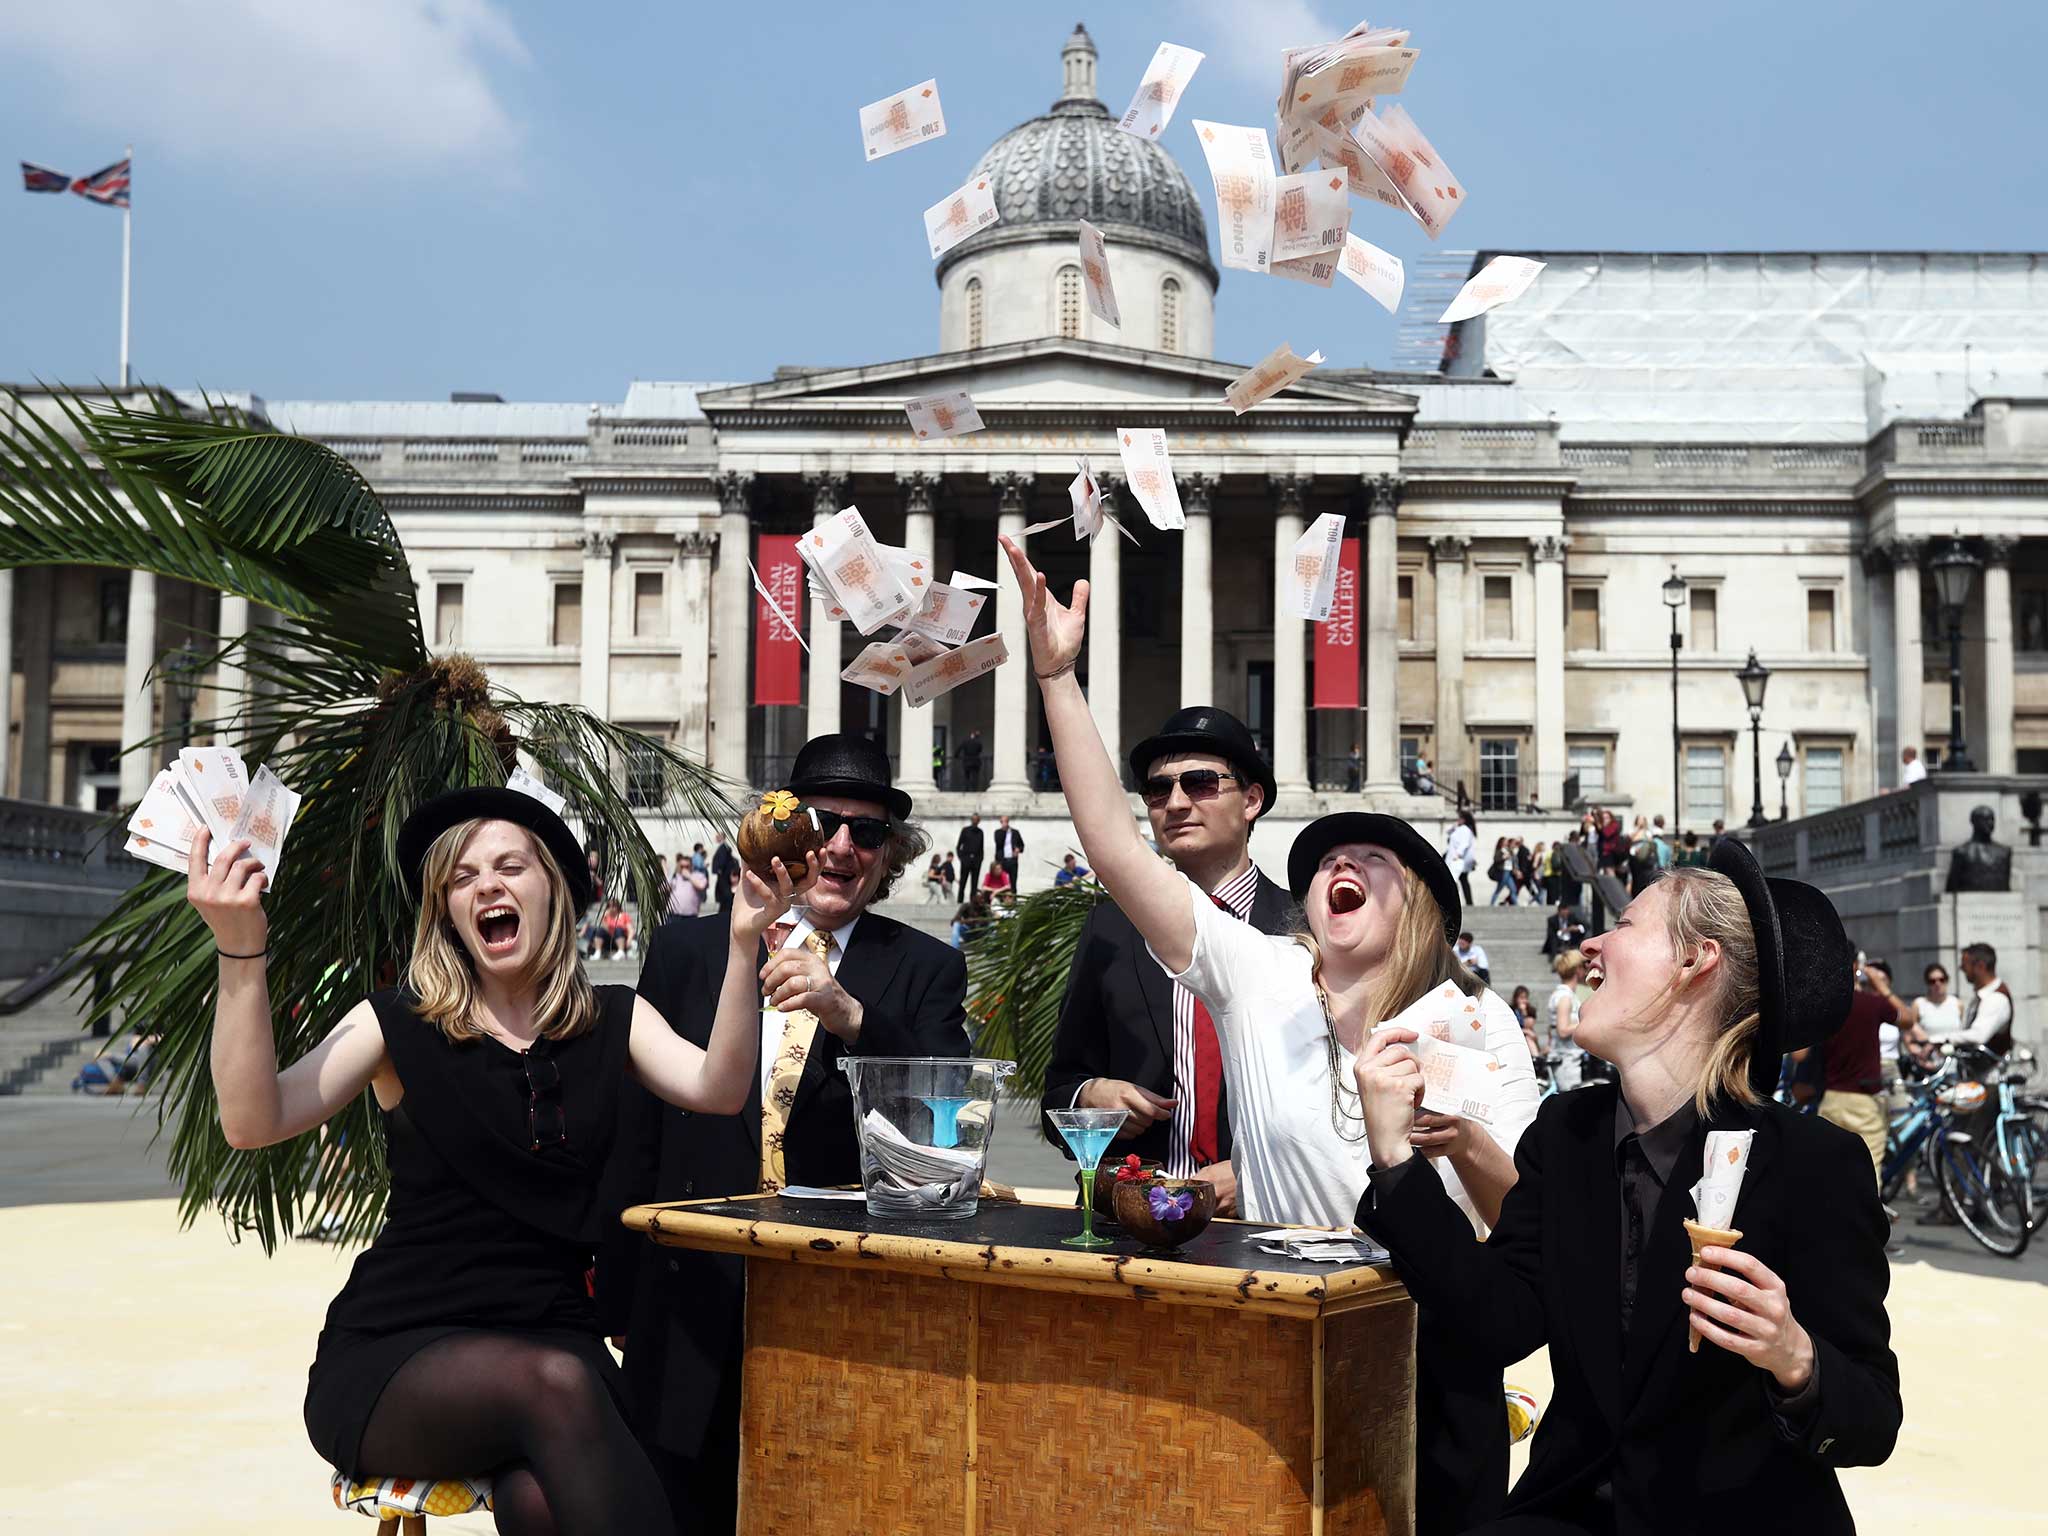 Protesters throw fake money as they take part in a demonstration against tax havens in London. The protest, organised by Oxfam, ActionAid and Christian Aid, turned part of Trafalgar Square into a 'tropical tax haven' to highlight tax dodging as an international corruption summit hosted by David Cameron was held in nearby Lancaster House